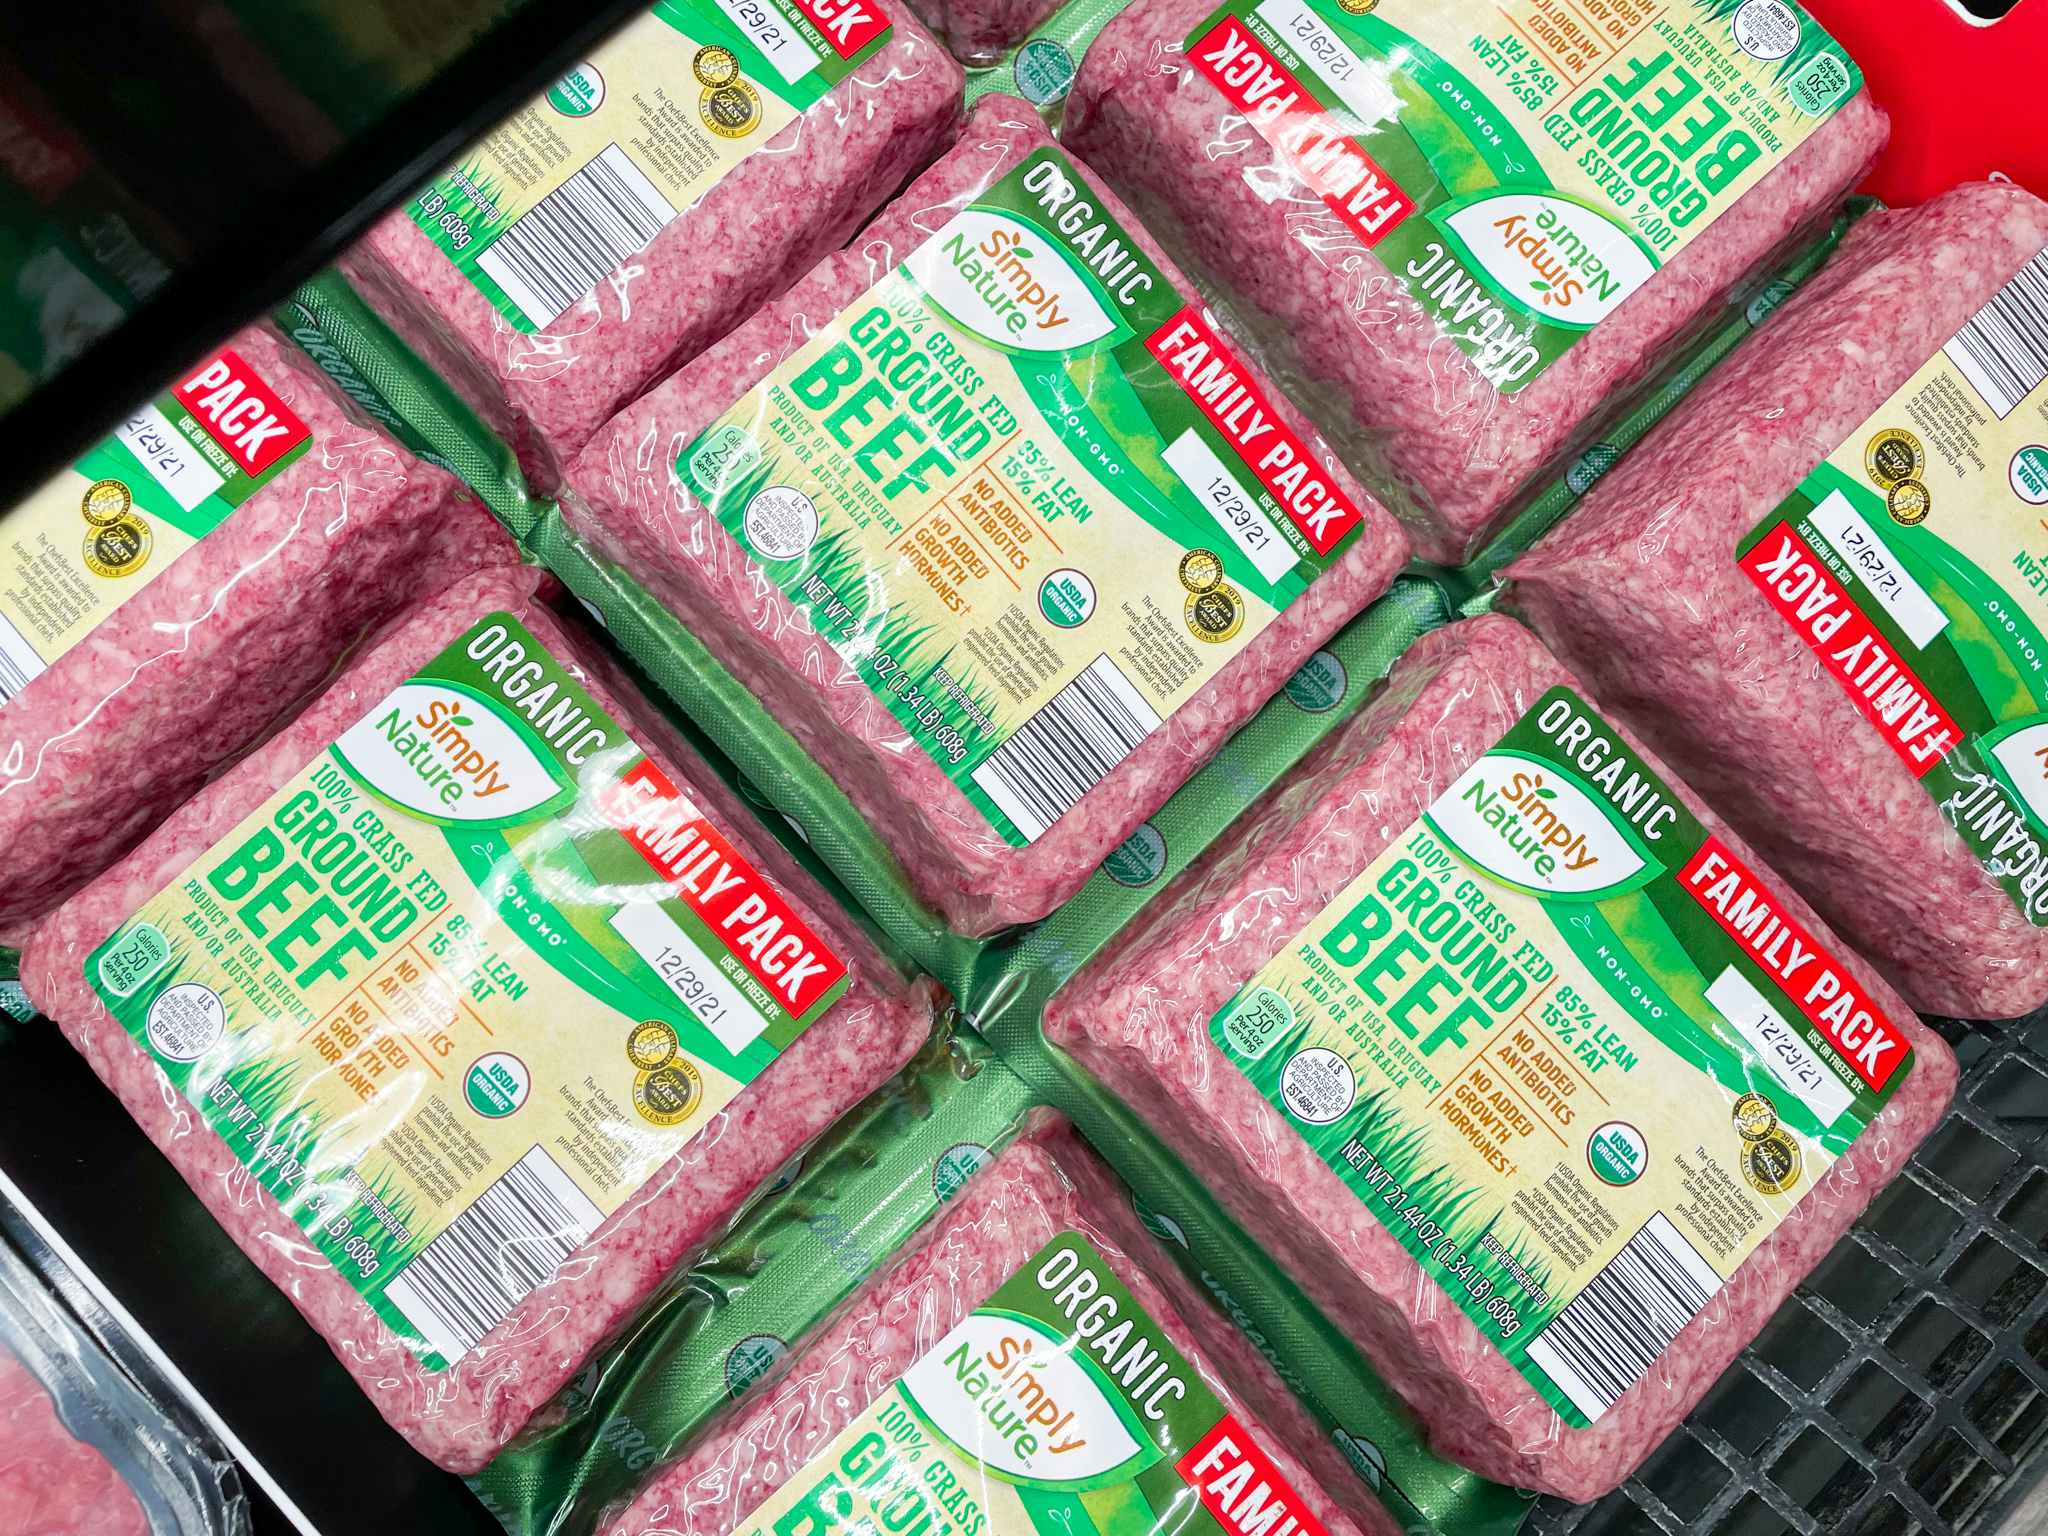 aldi simply nature grass-fed organic ground beef in store cooler